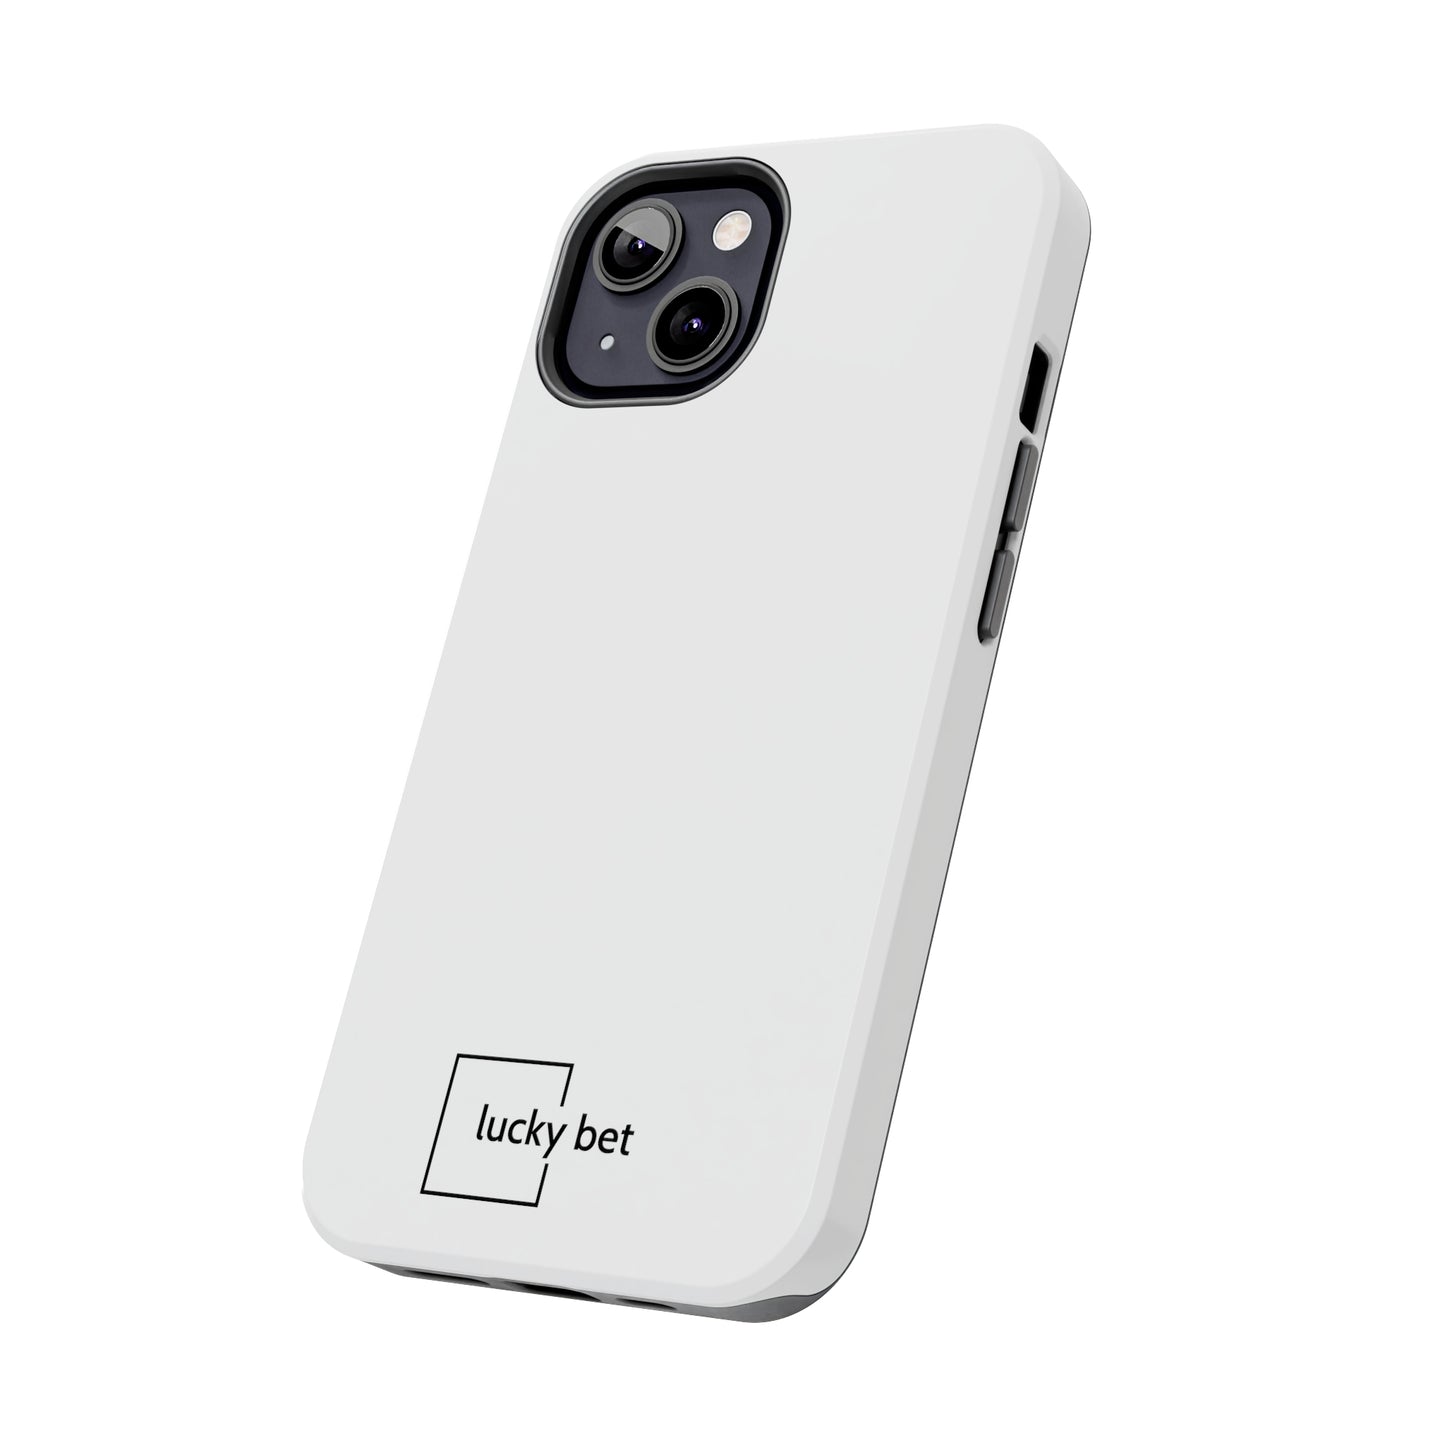 Lucky Bet Tough Phone Case: Armour for Your Device